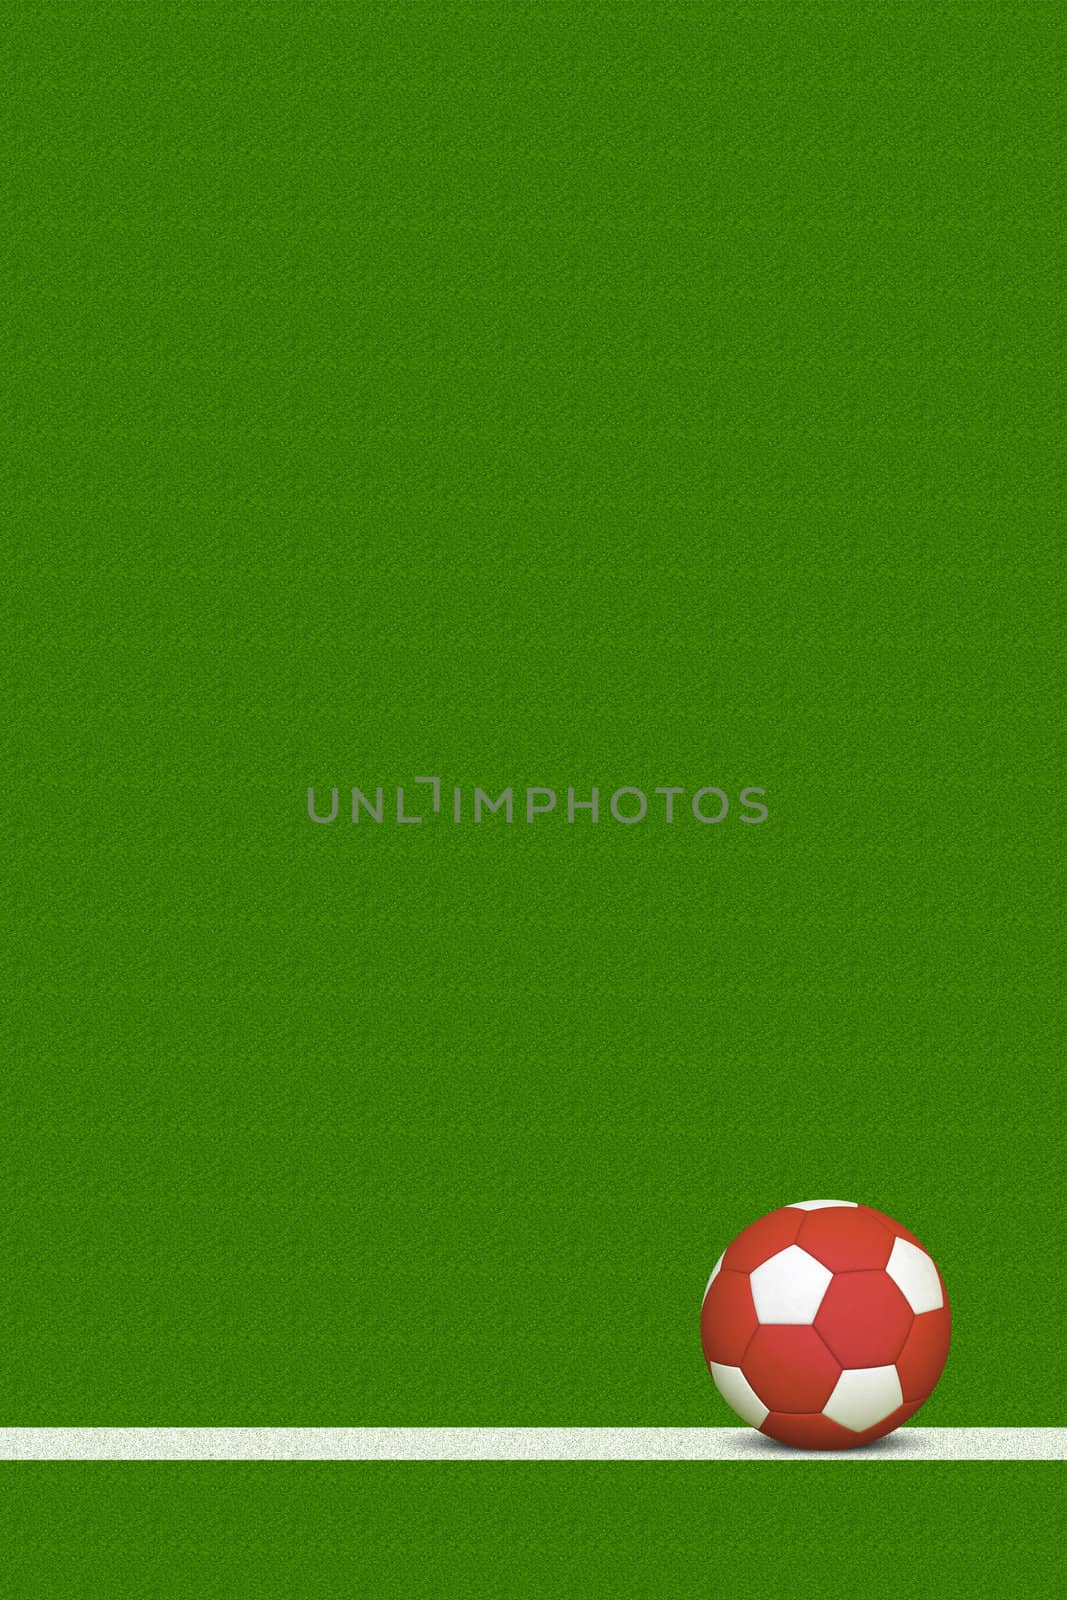 Red Soccer Ball Over White Line of Grass Field